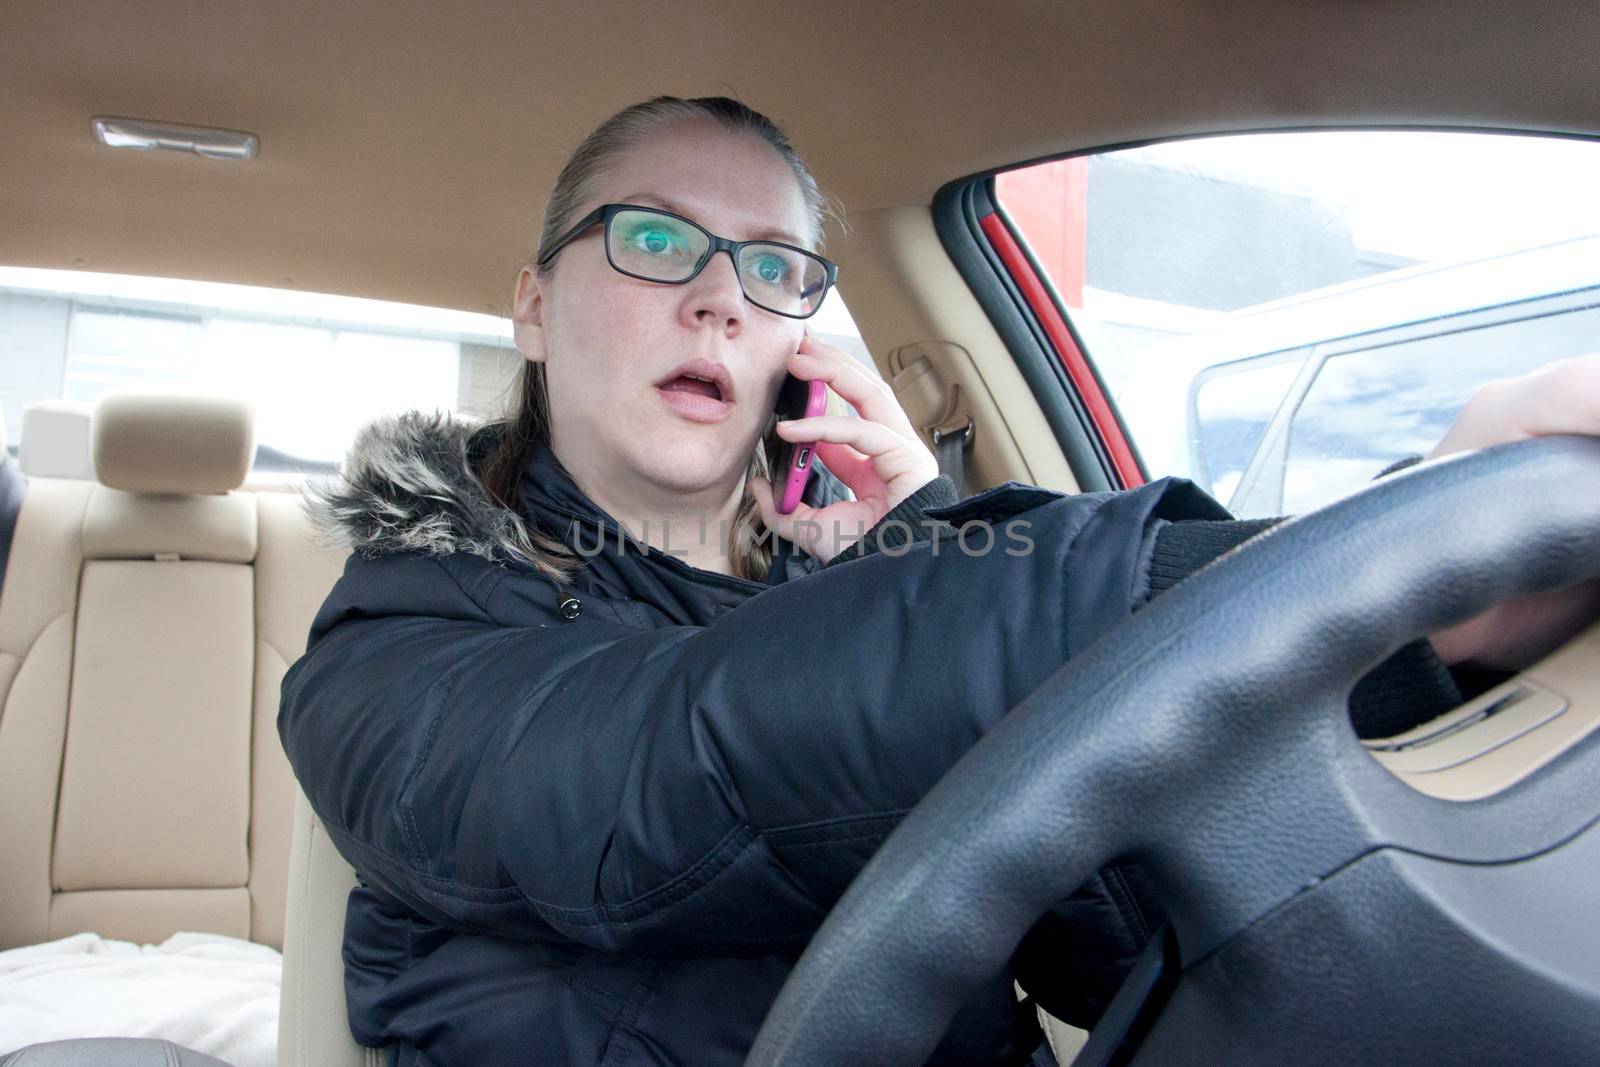  a woman talks on her cell phone while driving the car 